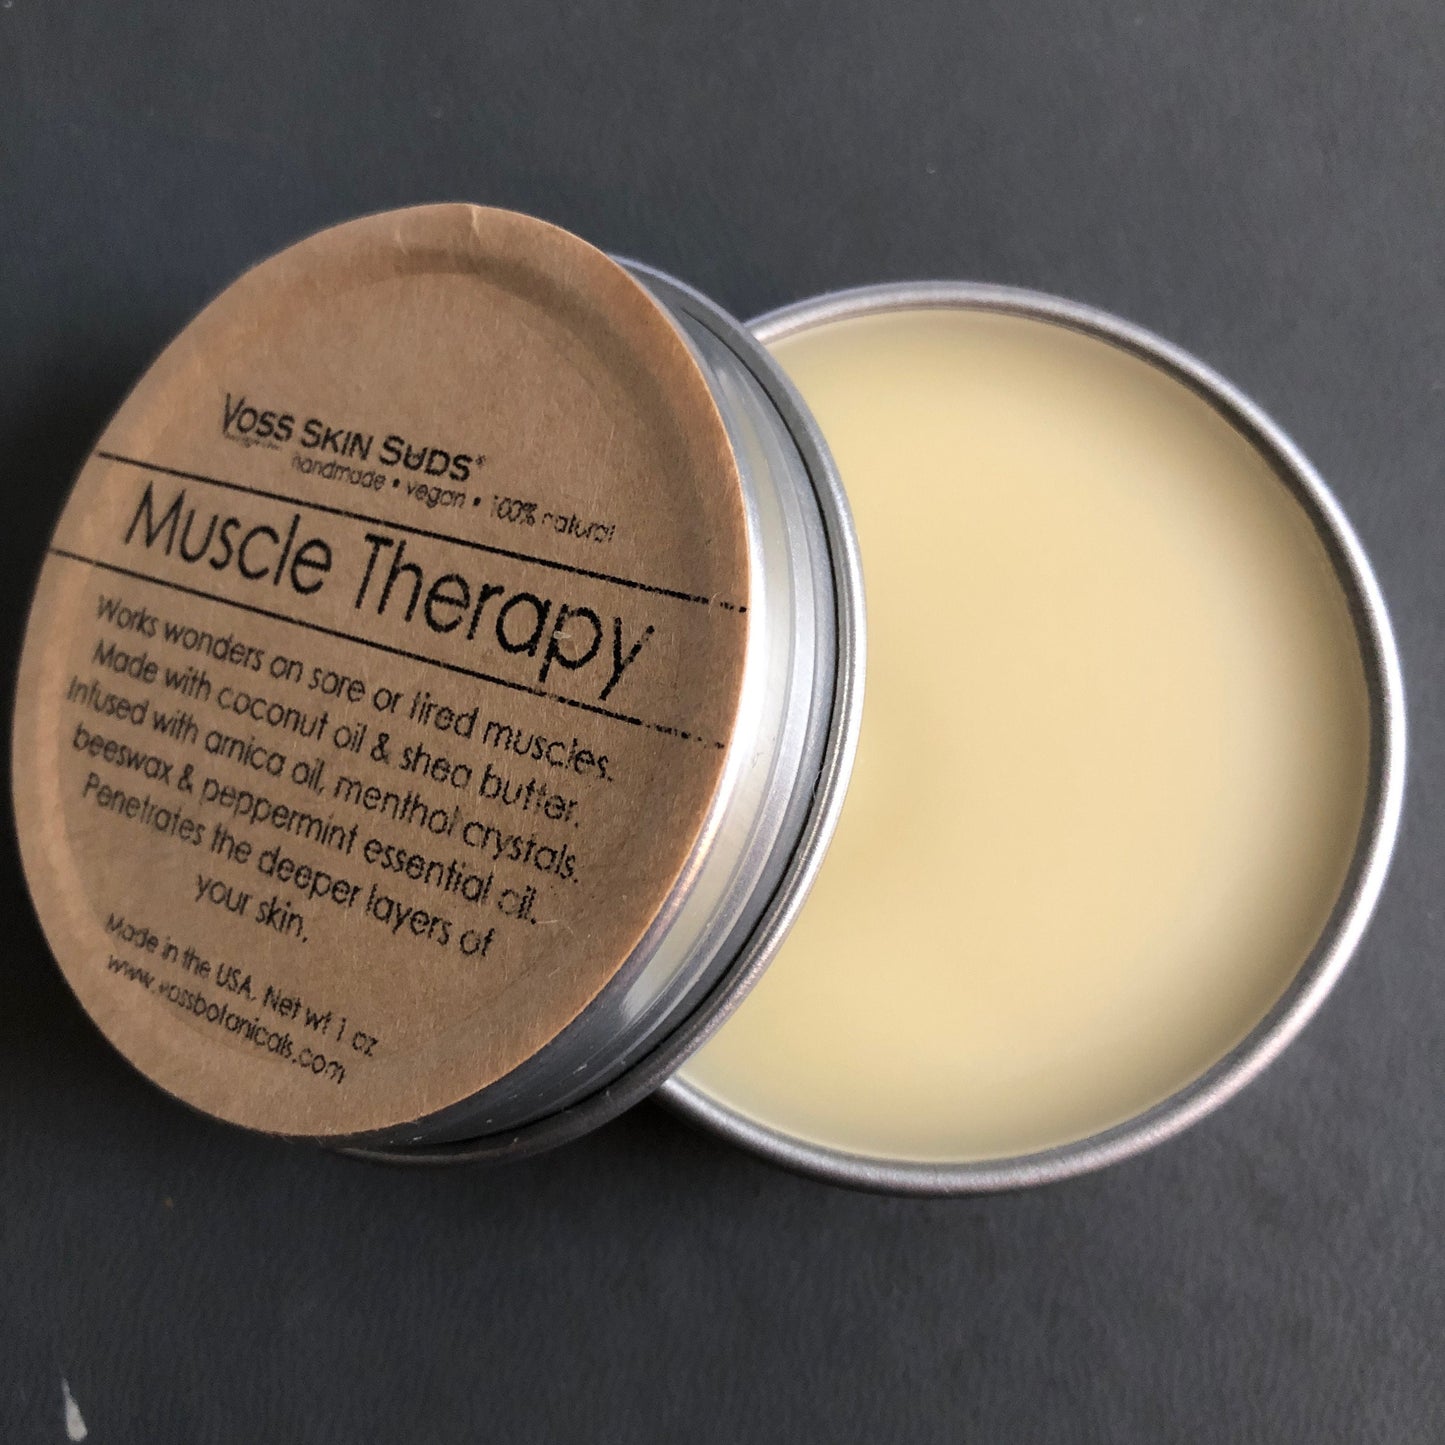 Muscle Therapy with Pepperming, Arnica and Menthol PRODUCT FOOTPRINTS Natural ingredients Phthalate, Sulfate, Petroleum & Paraben Free Vegan Free of Synthetic Fragrances Free of Synthetic Dyes GMO & Gluten-free Non Toxic Handmade Sustainable Innovation Made in the USA Cruelty Free Zero Waste Low Carbon Footprint eco friendly   Holiday care package gift box gift for her relaxation gift self care box self care gift box spa gift box spa gift set thank you gift box birthday gift travel essentials